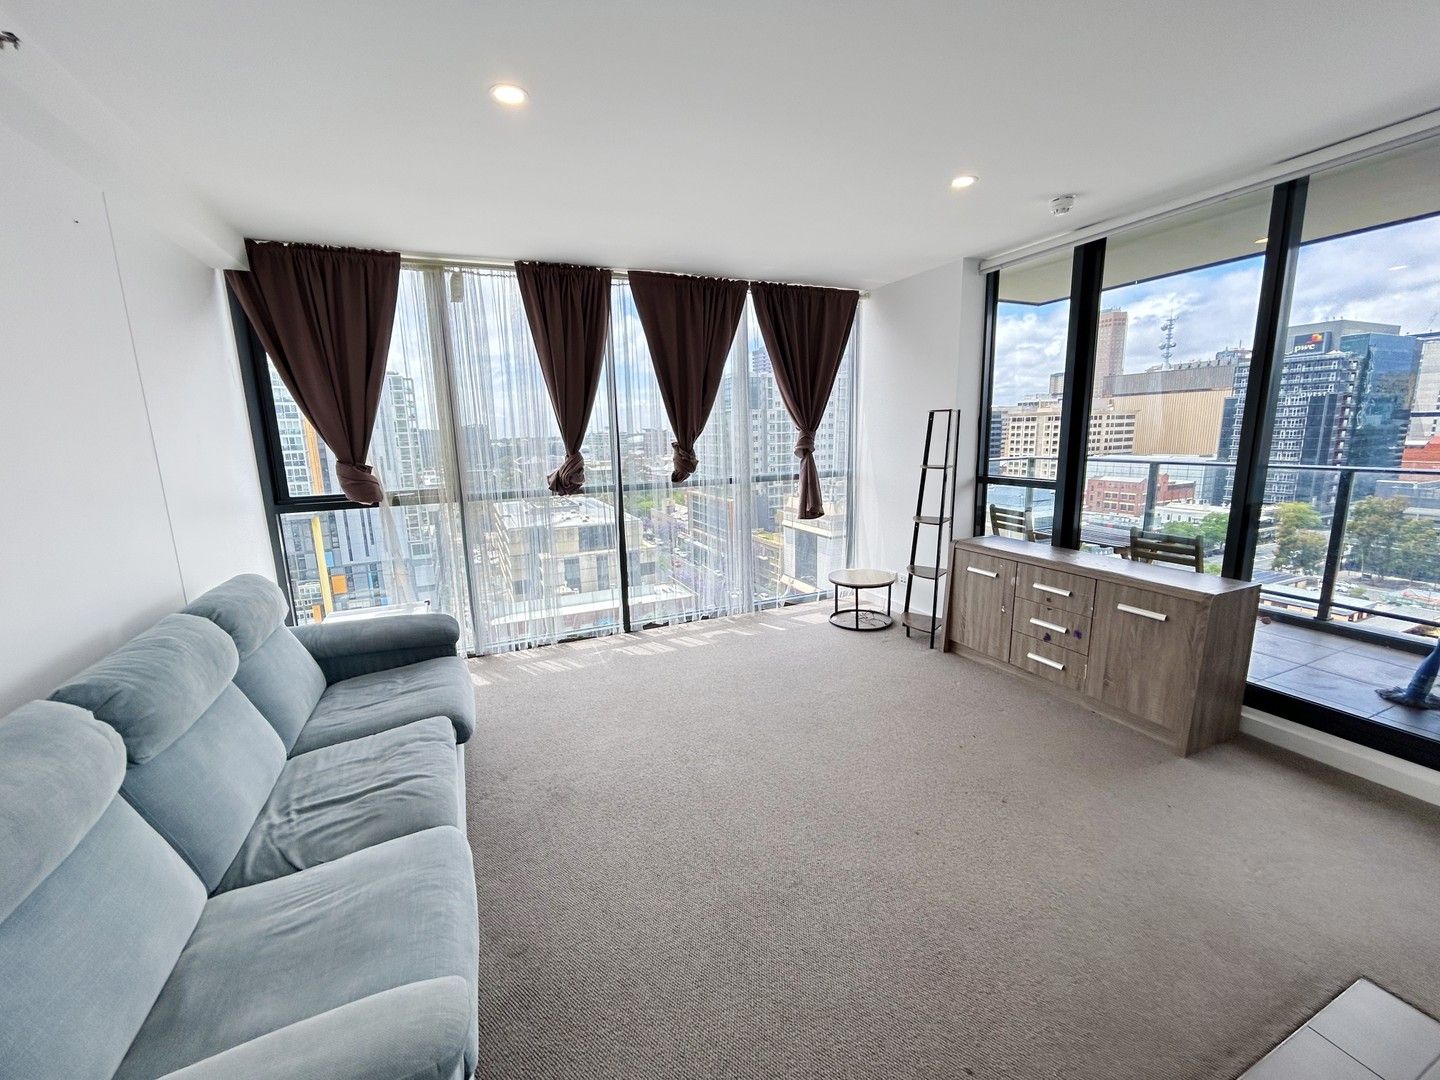 2 bedrooms Apartment / Unit / Flat in 1216/160 Grote Street ADELAIDE SA, 5000